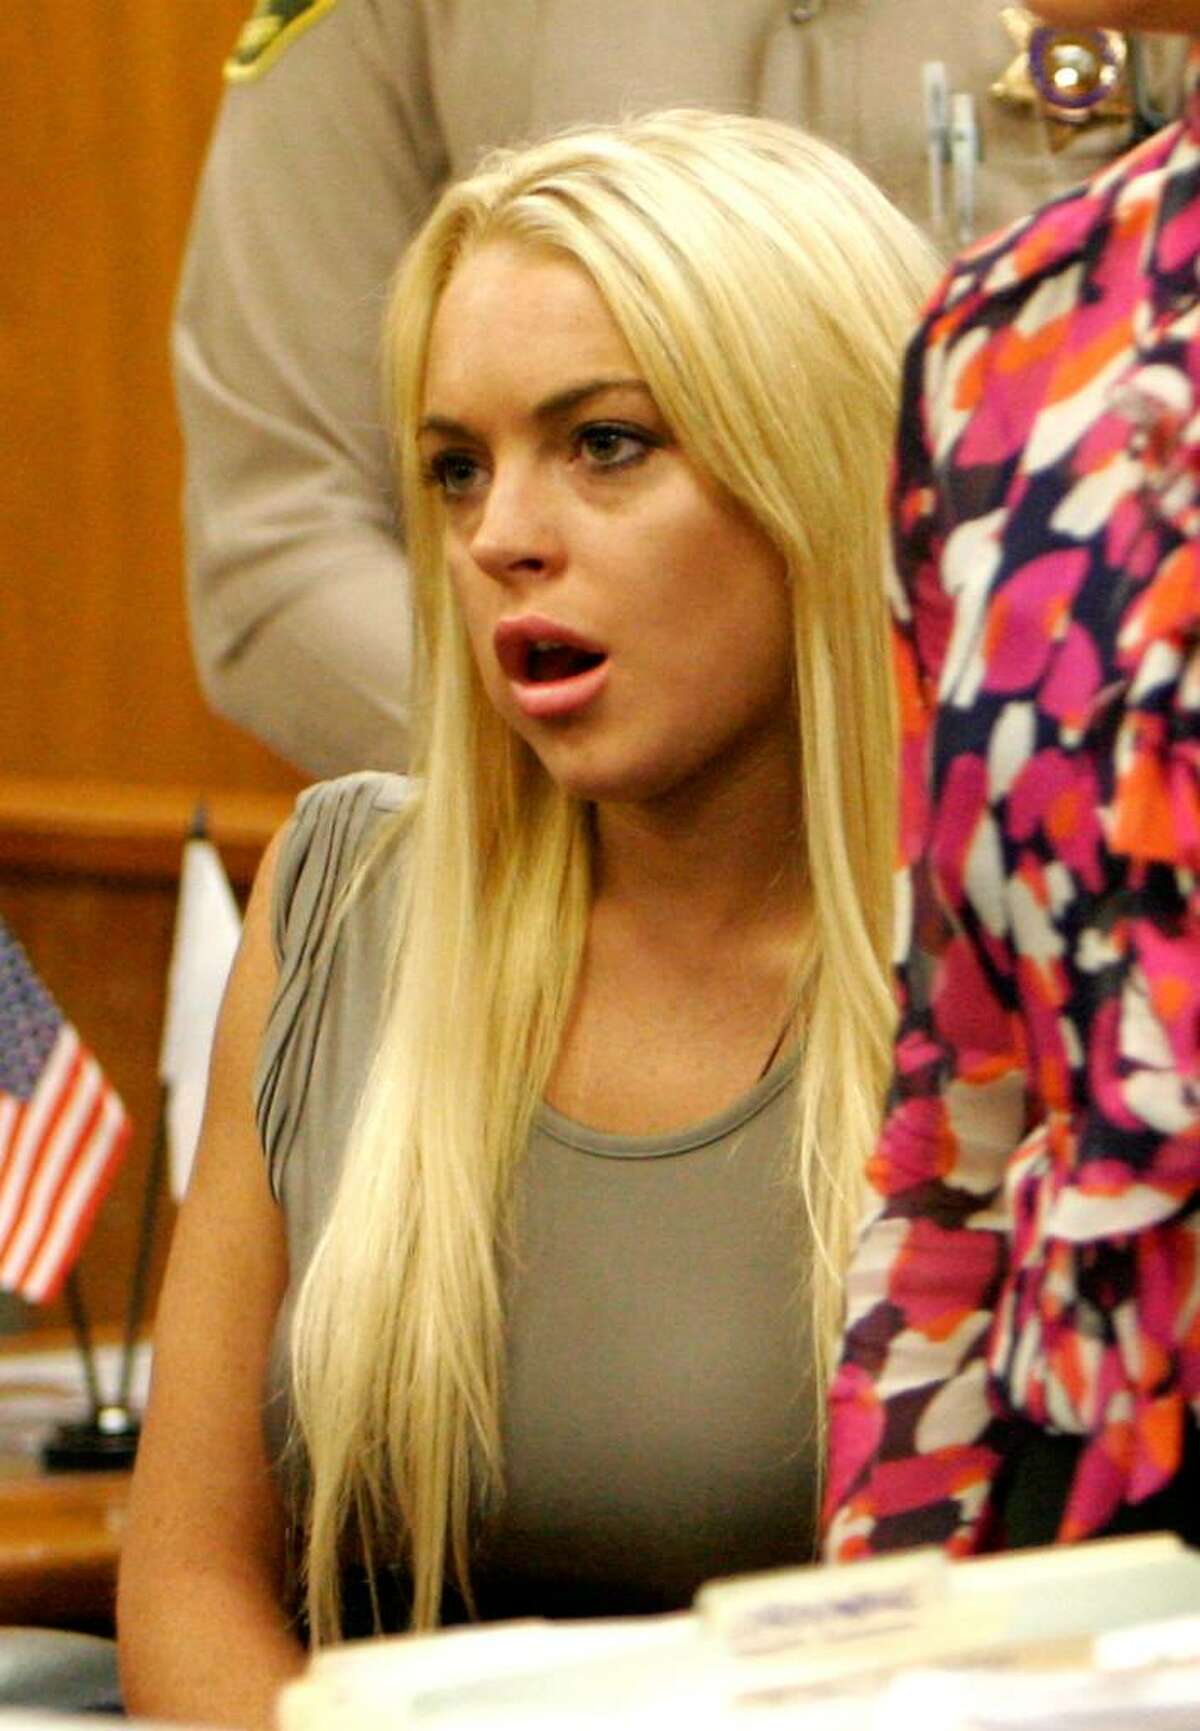 BEVERLY HILLS, CA - JULY 20: Actress Lindsay Lohan surrenders at the Beverly Hills Courthouse to serve her 90 day jail sentence on July 20, 2010 in Beverly Hills, California. Lindsay Lohan was found in violation of her probation for the August 2007 no-contest plea to drug and alcohol charges stemming from two separate traffic accidents. (Photo by Al Seib-Pool/Getty Images) *** Local Caption *** Lindsay Lohan